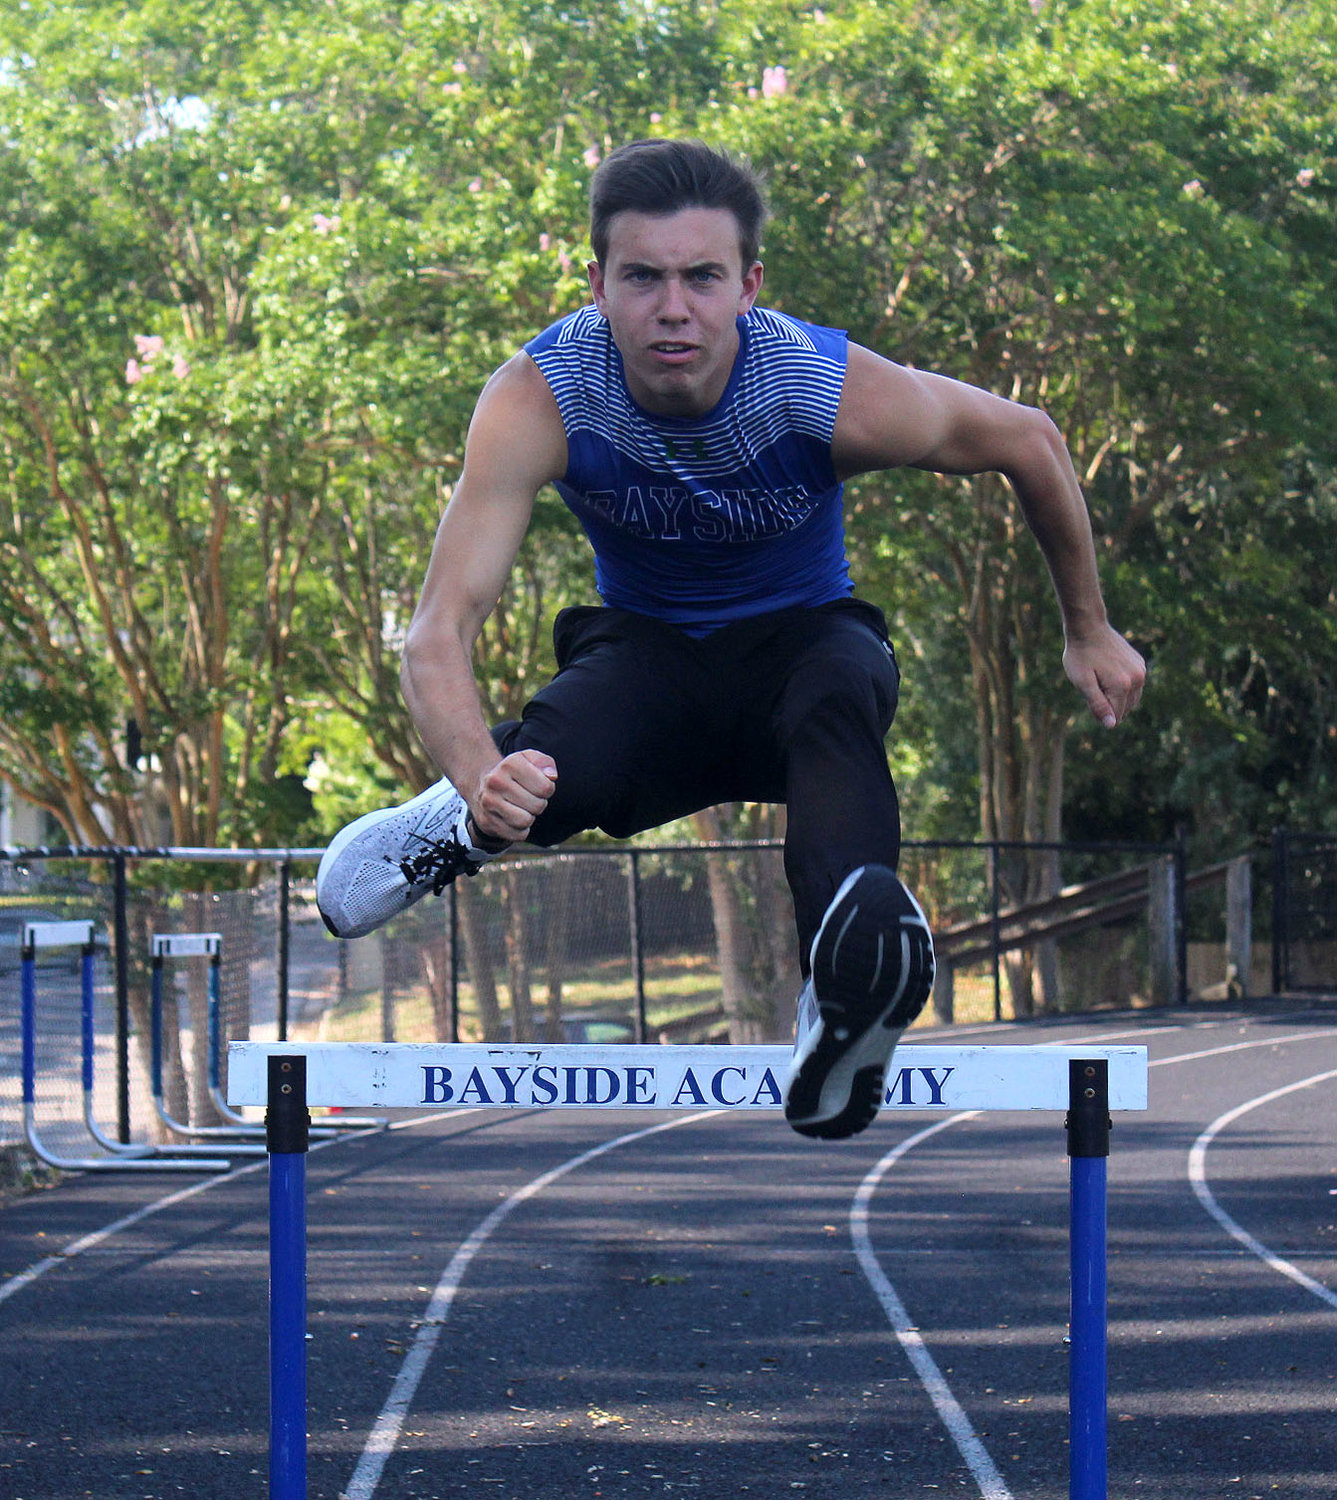 Bayside Academy hurdler Patrick Daves is ready for his next hurdle, college track. The recent graduate signed his commitment to the University of Alabama in December to join the Crimson Tide track and field team.